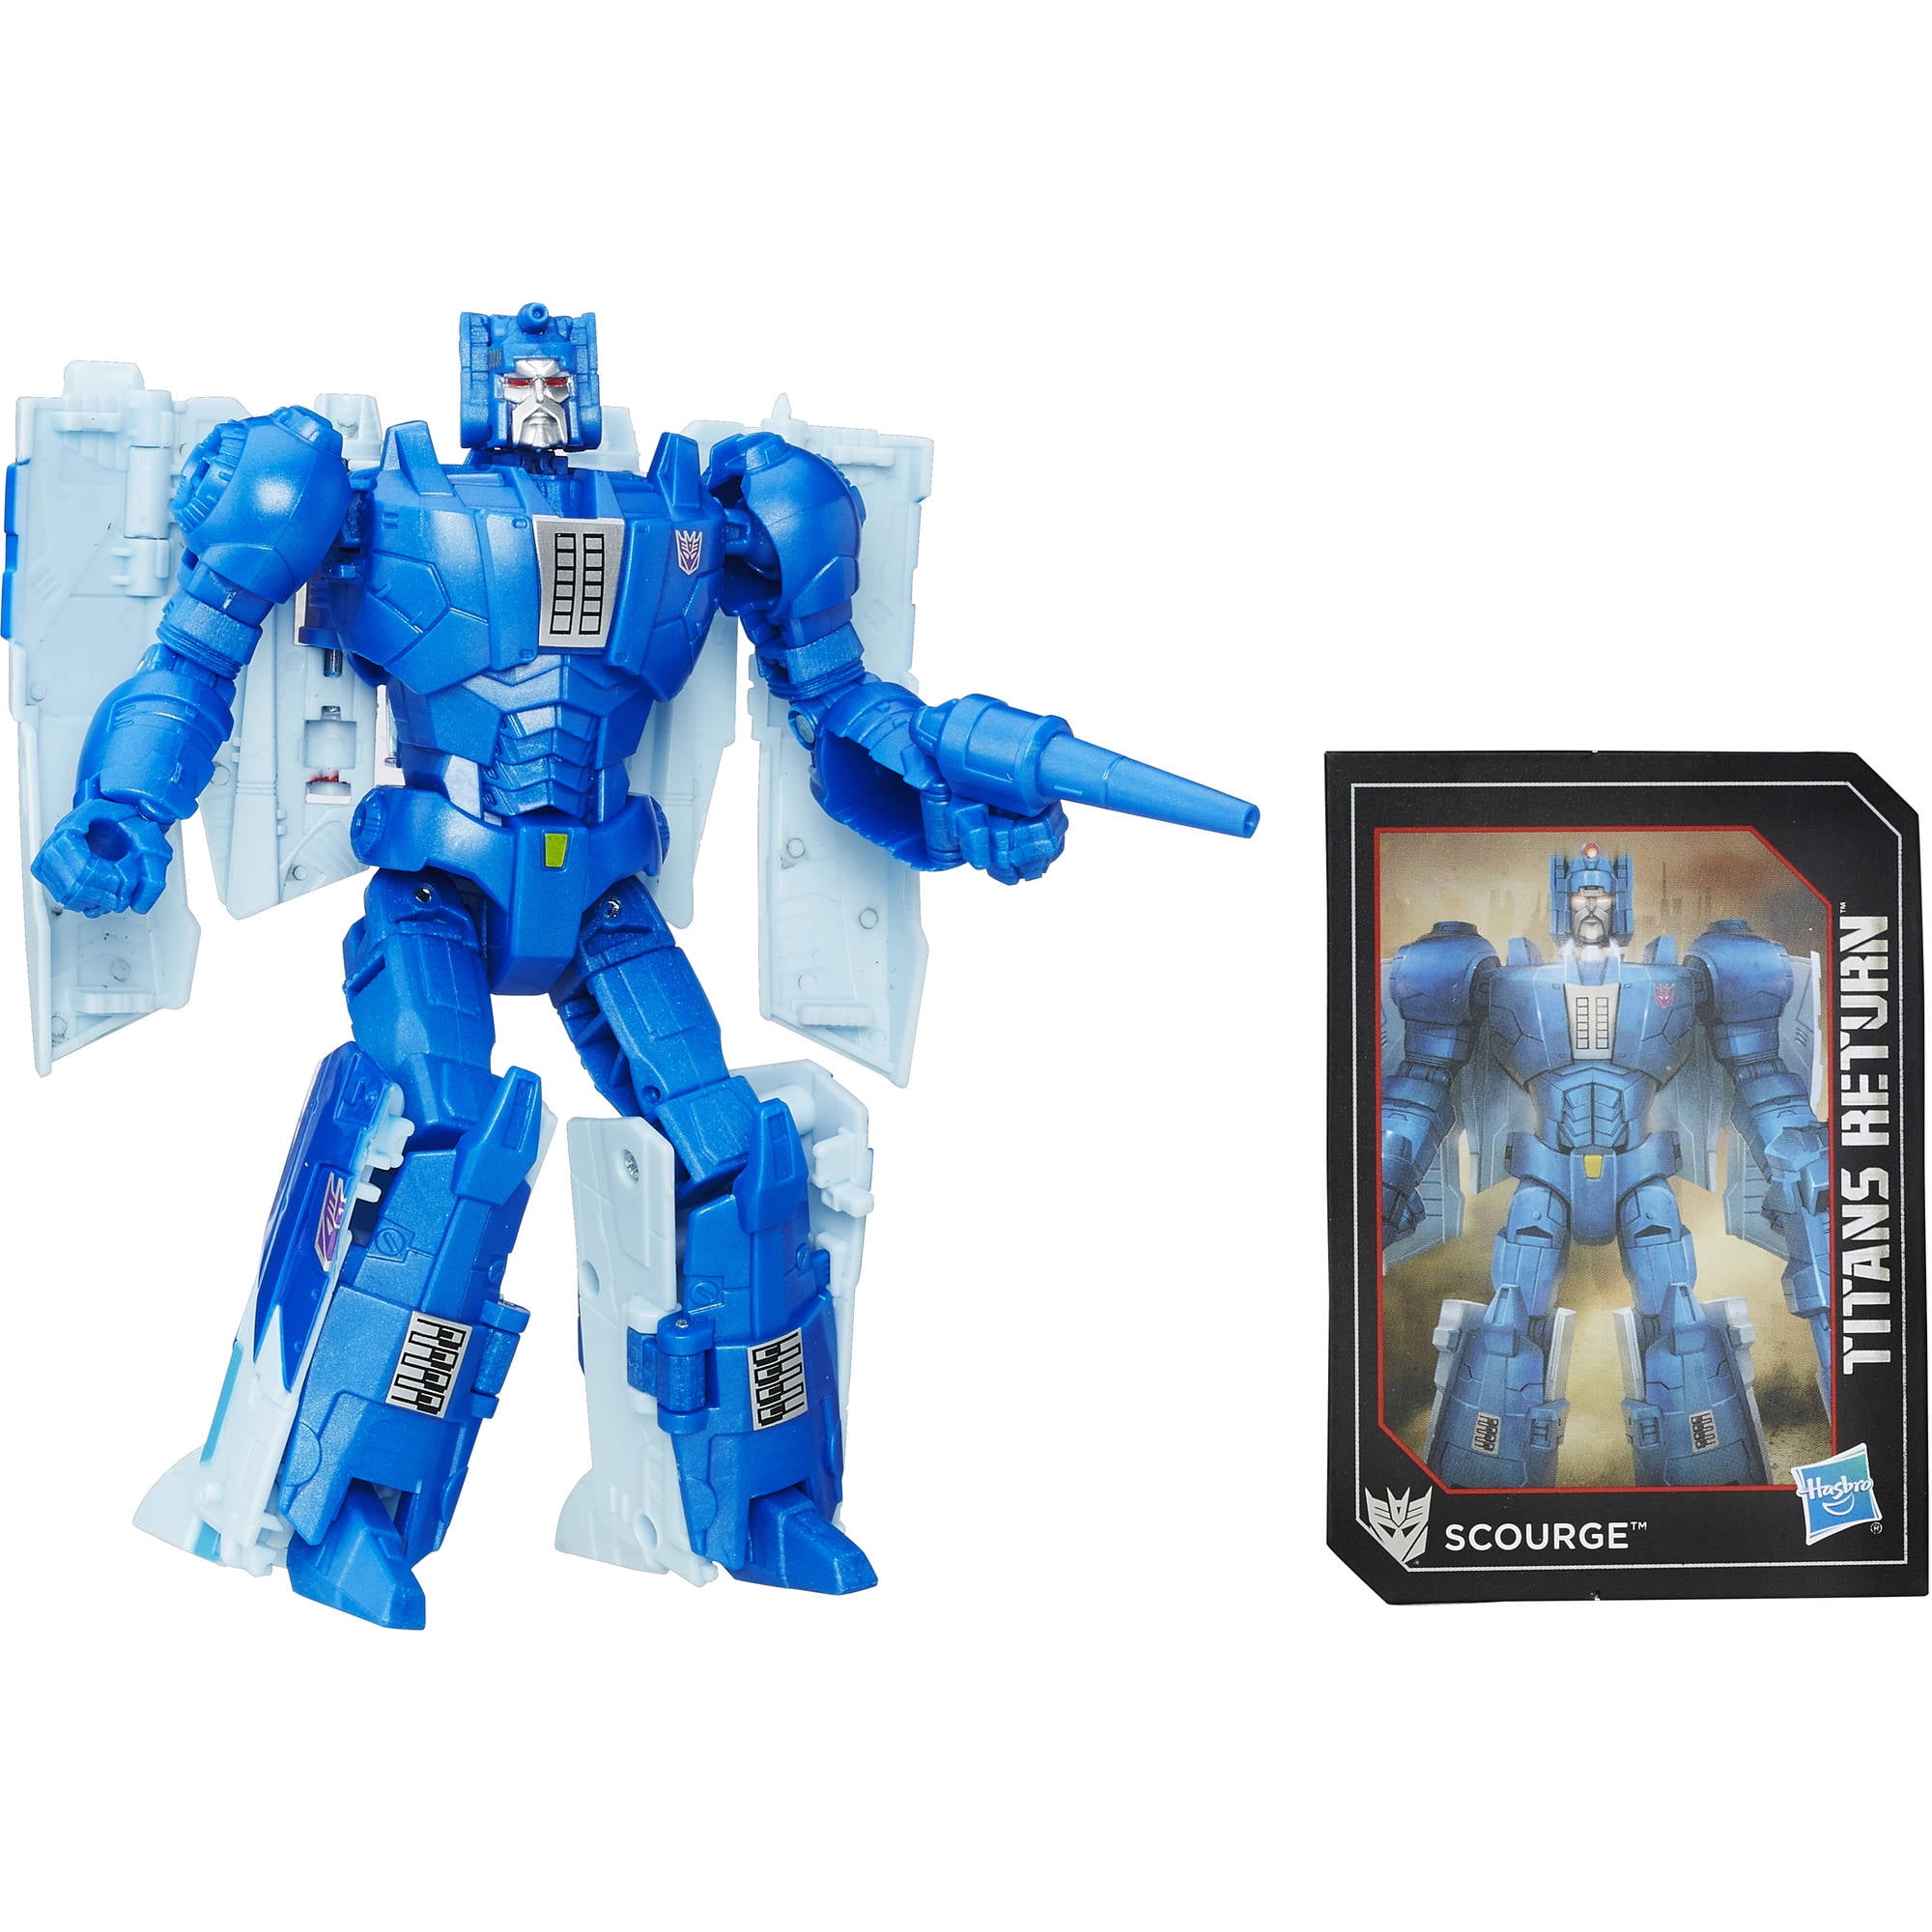 TITAN Master Fangry Transformers Titans Return Generations 2017 Hasbro for sale online 